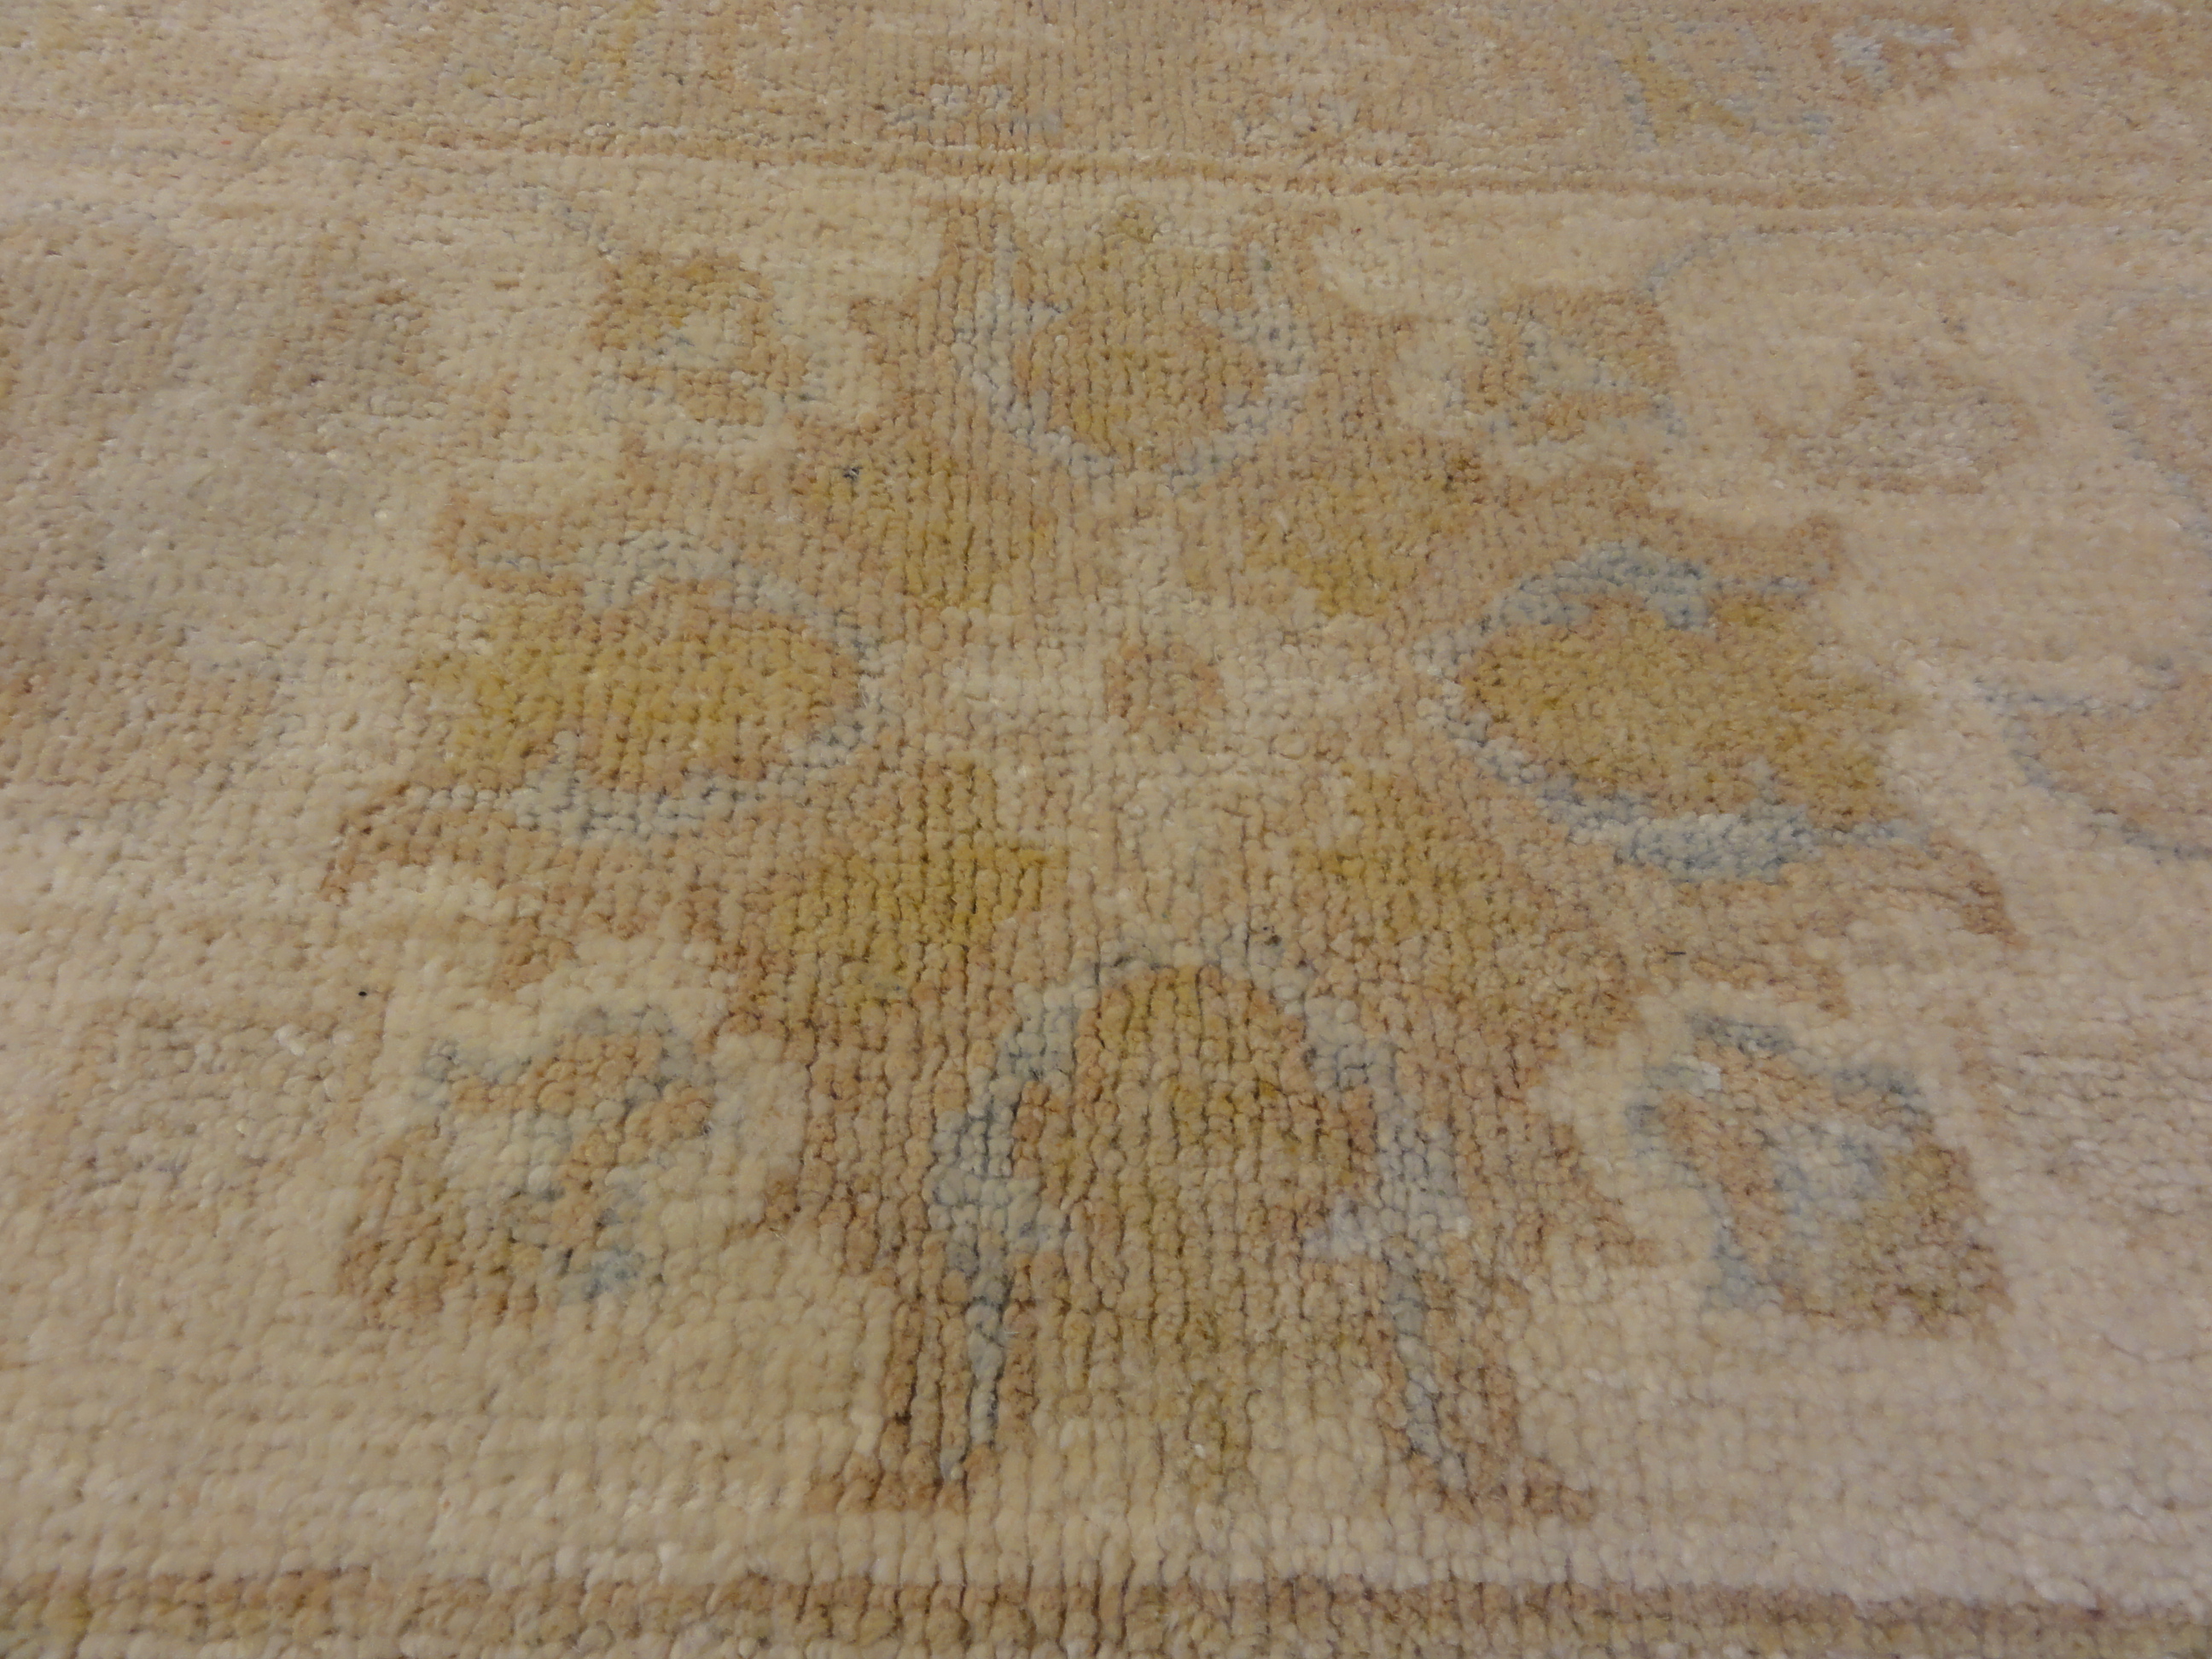 Finest Ziegler Oushak 30285. A piece of genuine authentic woven carpet art sold by the Santa Barbara Design Center, Rugs and More.